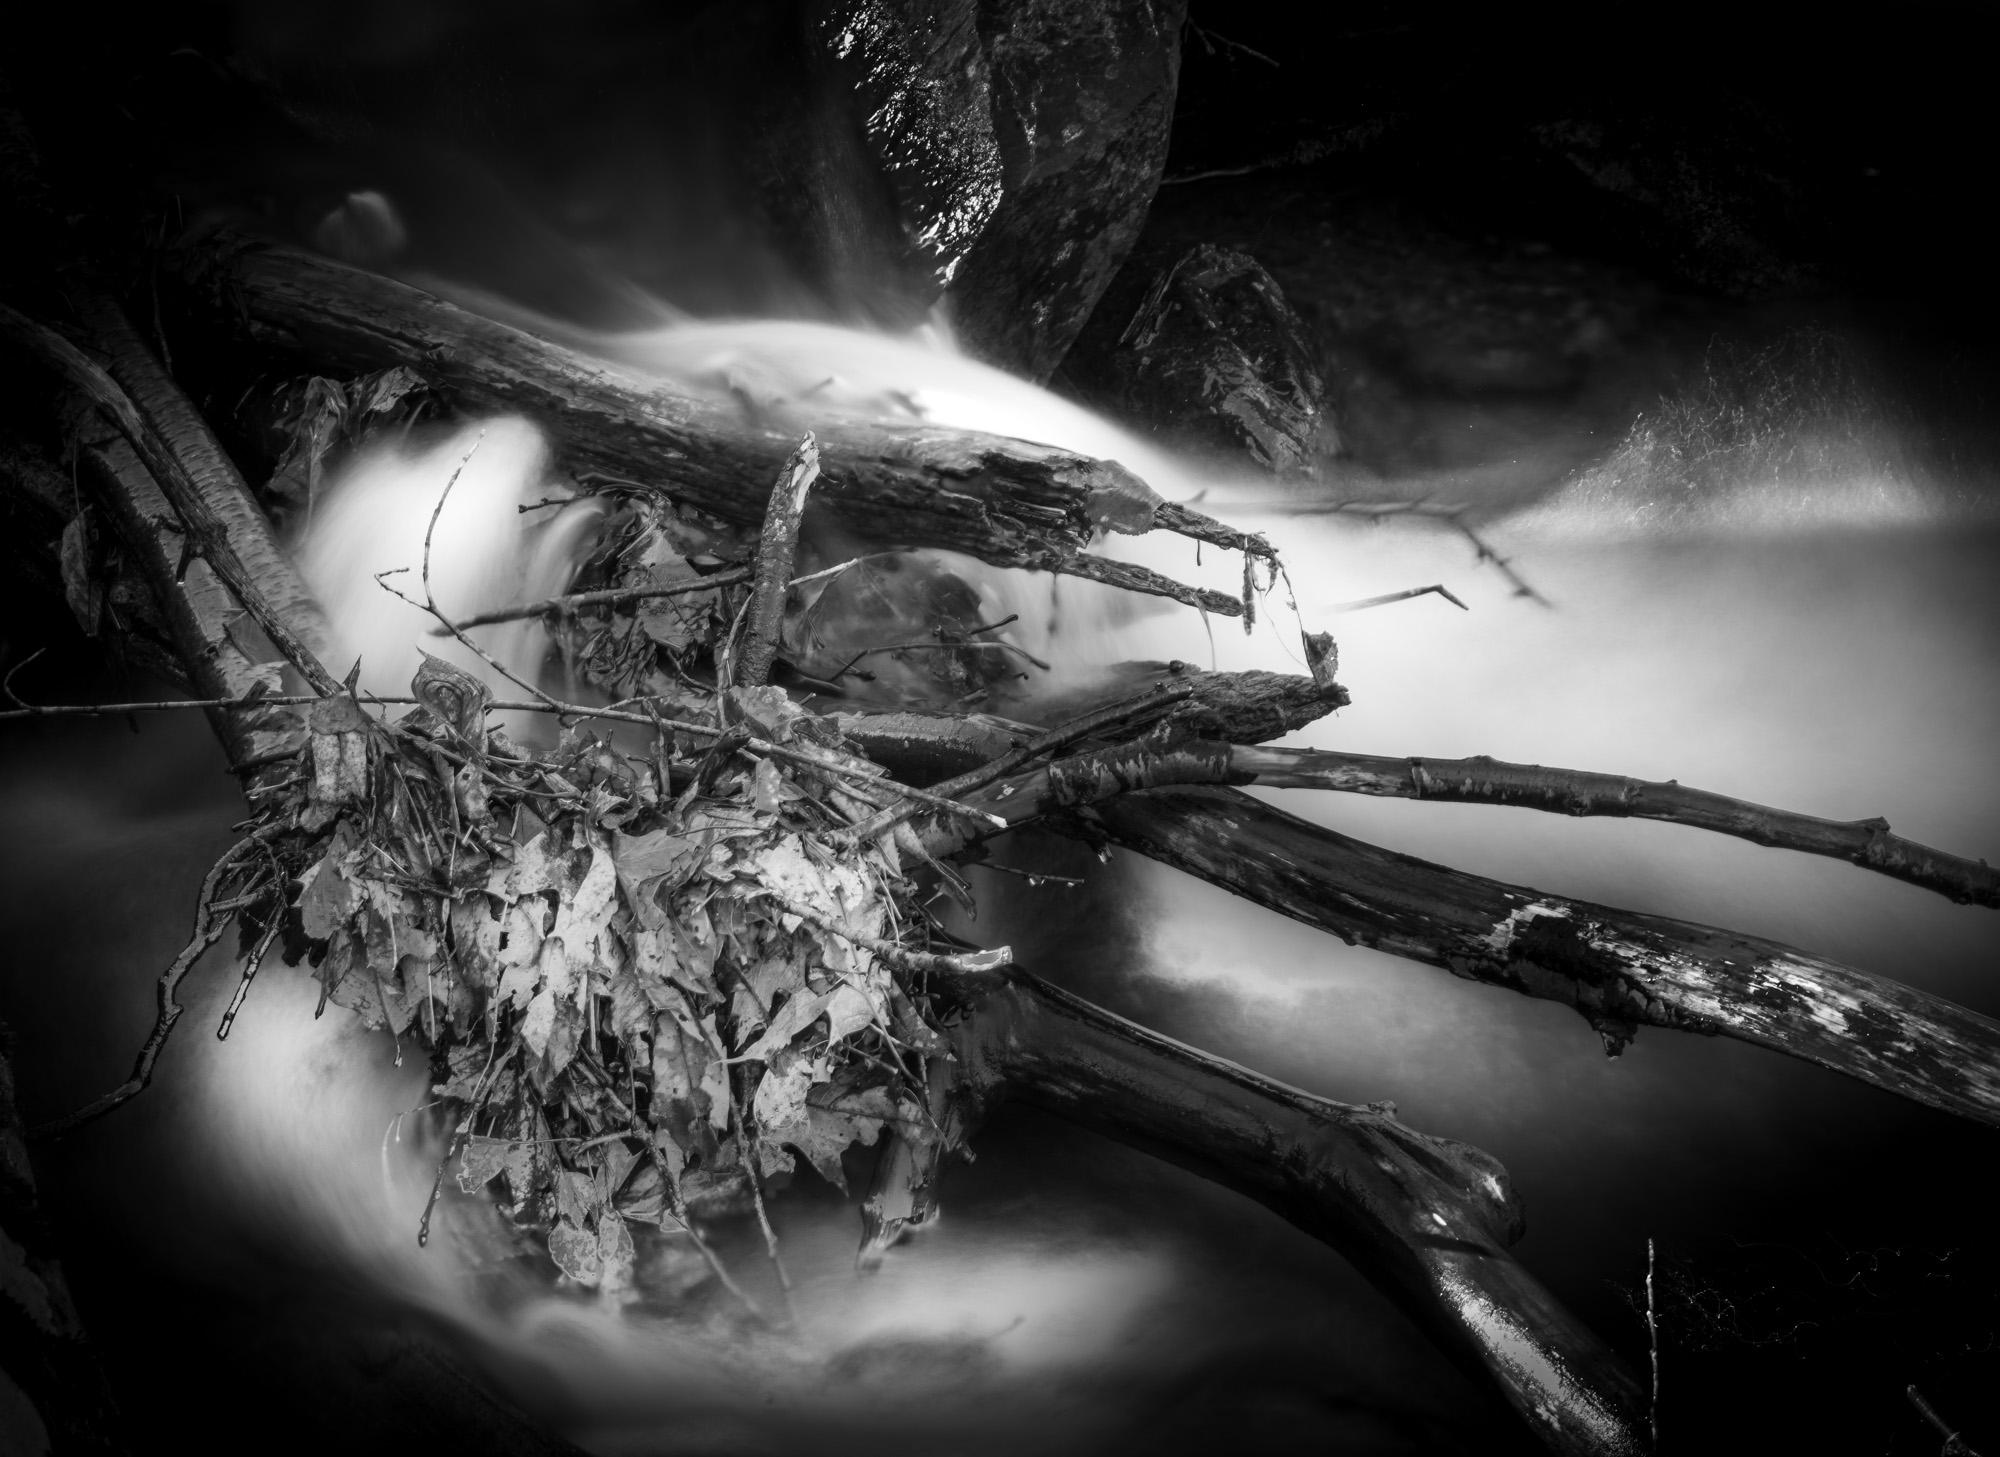 Howard Lewis Landscape Photograph - Black and White Nature Photograph - Water, Stream and Leaves